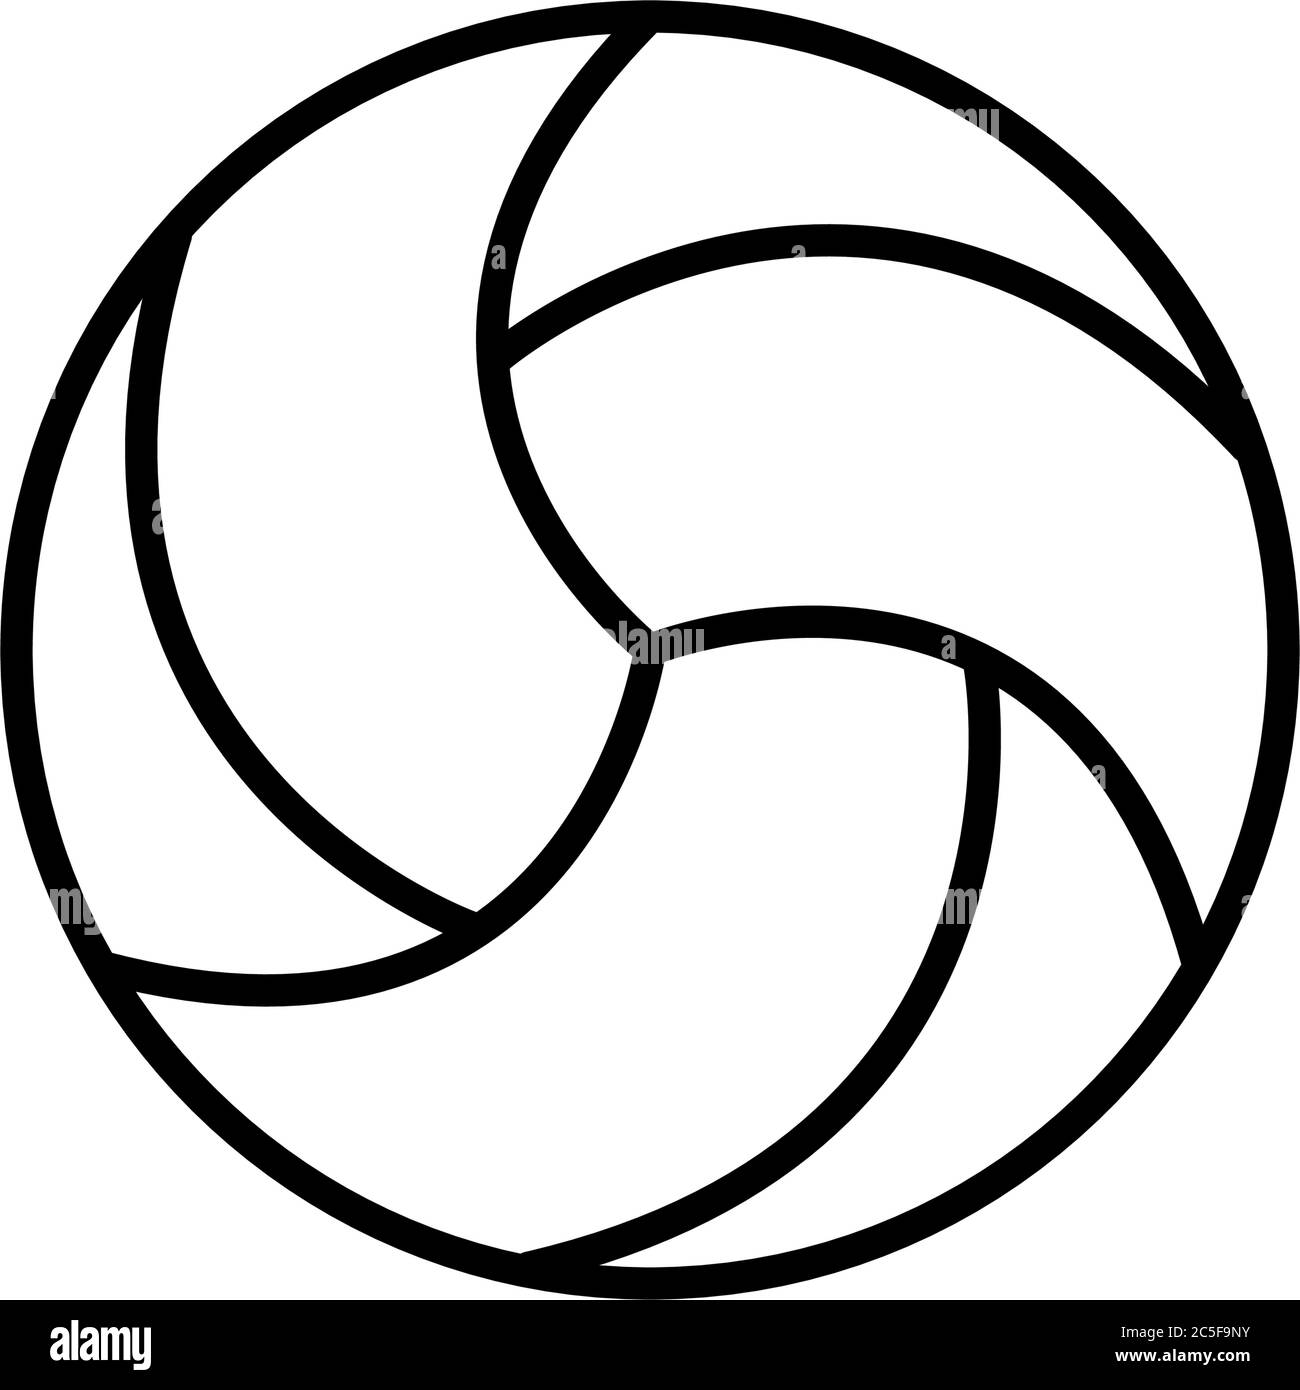 Volleyball icon black and white sports ball vector illustration Stock Vector